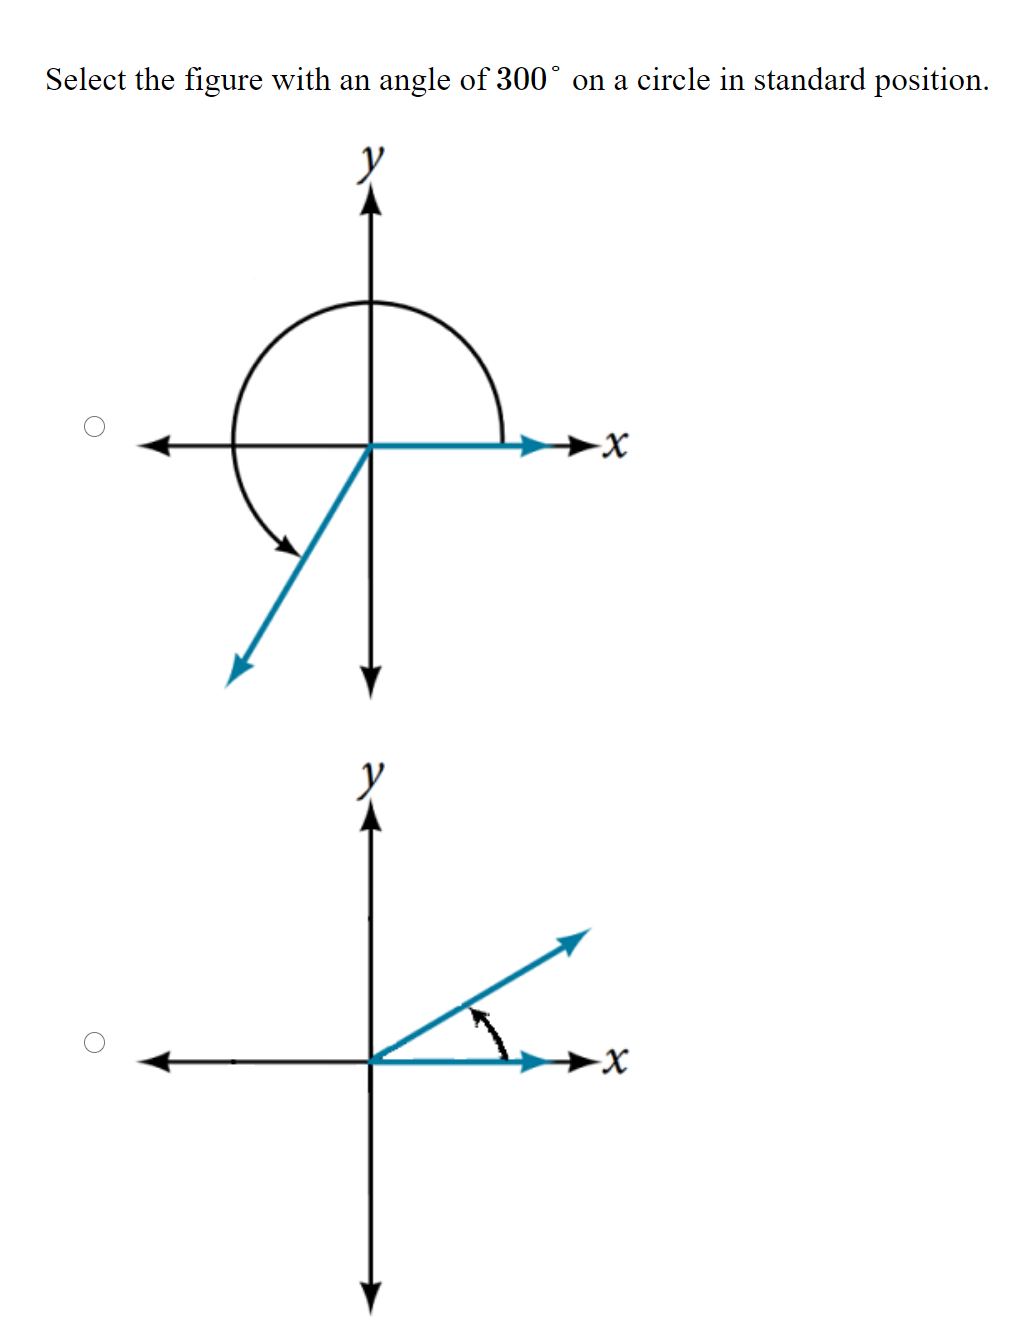 Select the figure with an
angle of 300° on a circle in standard position.
-X-
